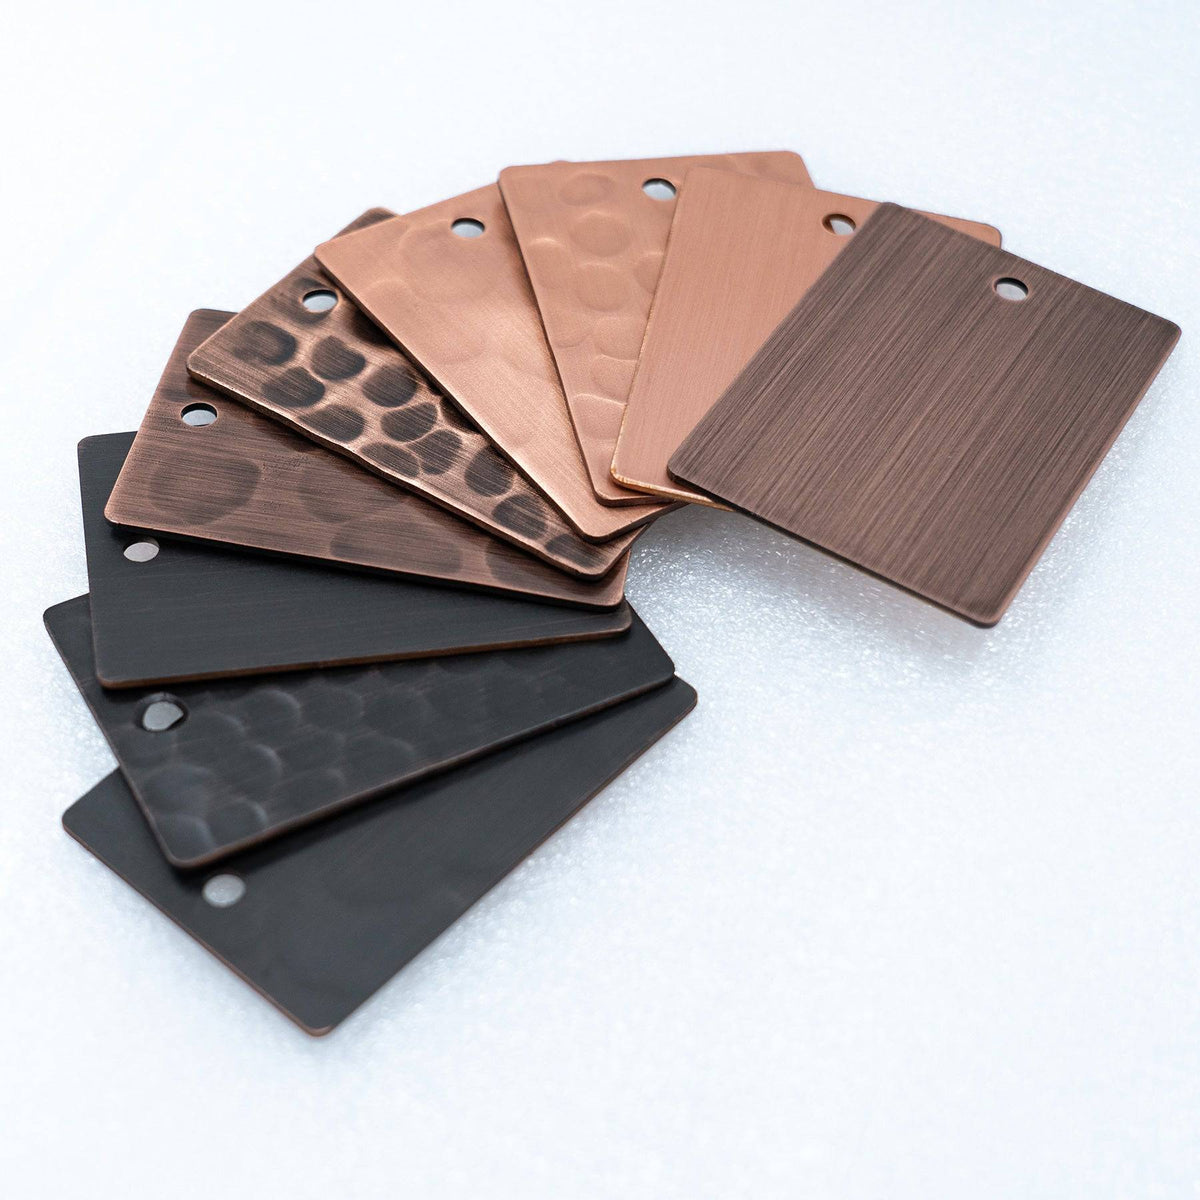 Fobest Copper Samples 9 packs (3 Colors x 3 Textures) - -Fobest Appliance